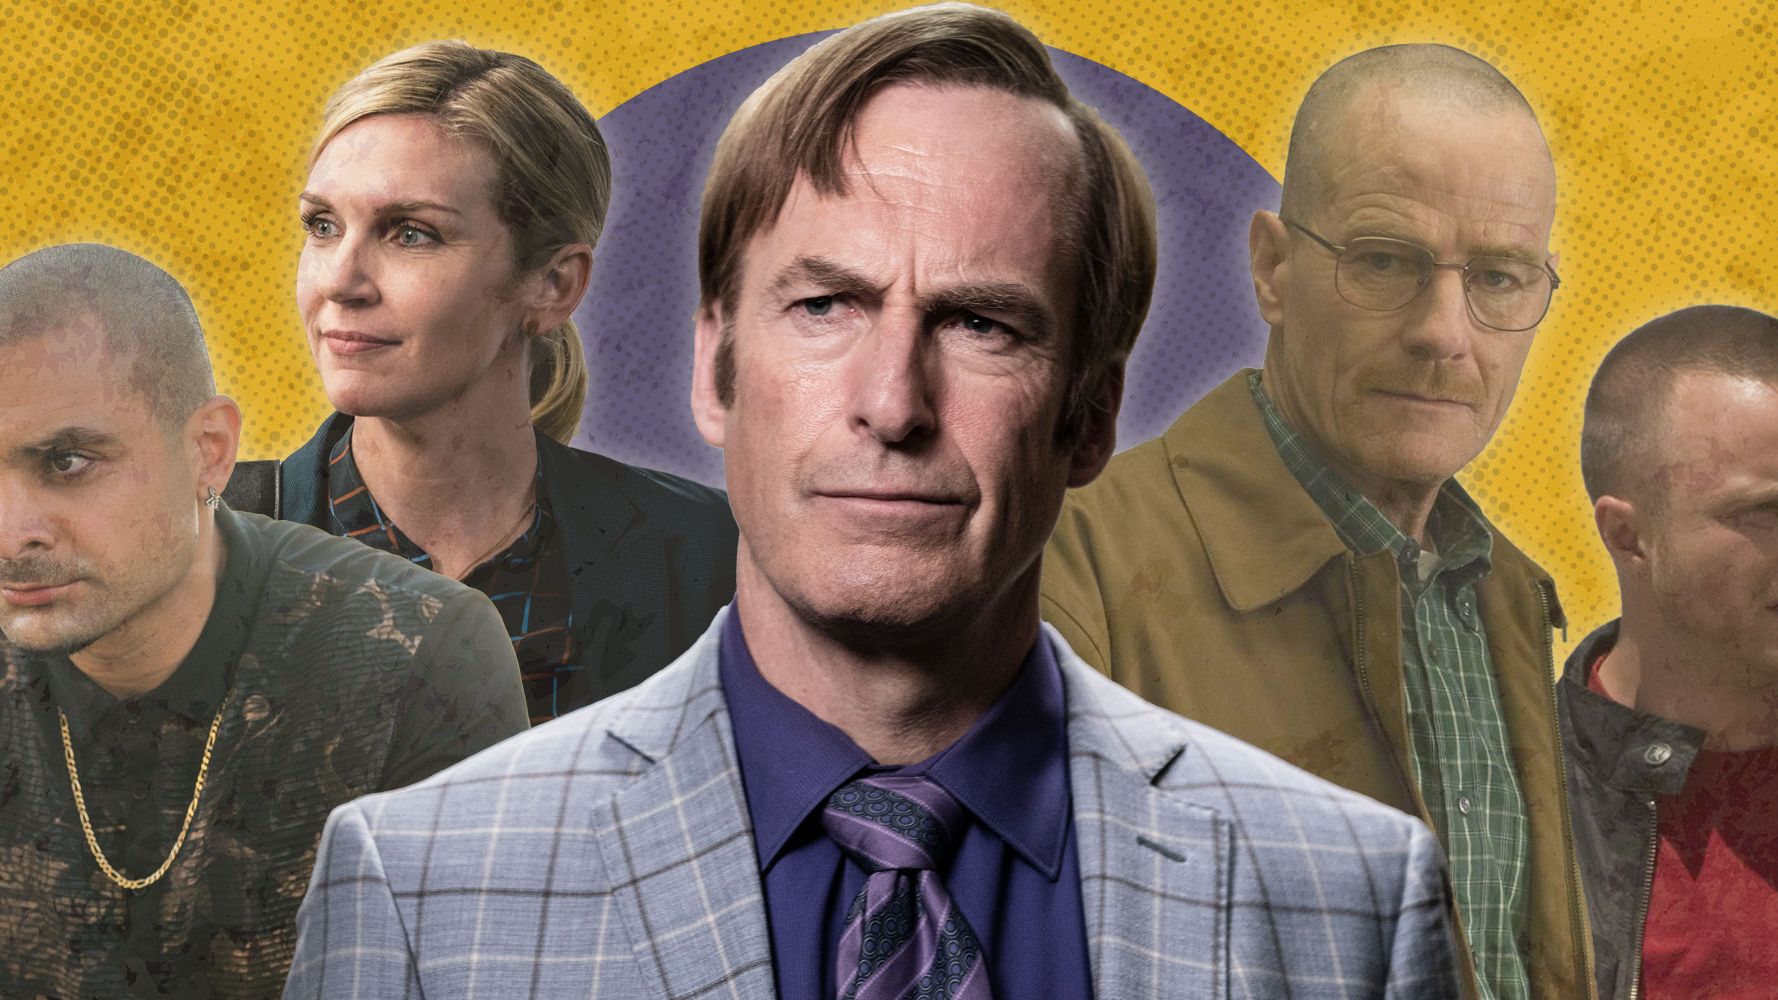 Better Call Saul: The story you want to know now